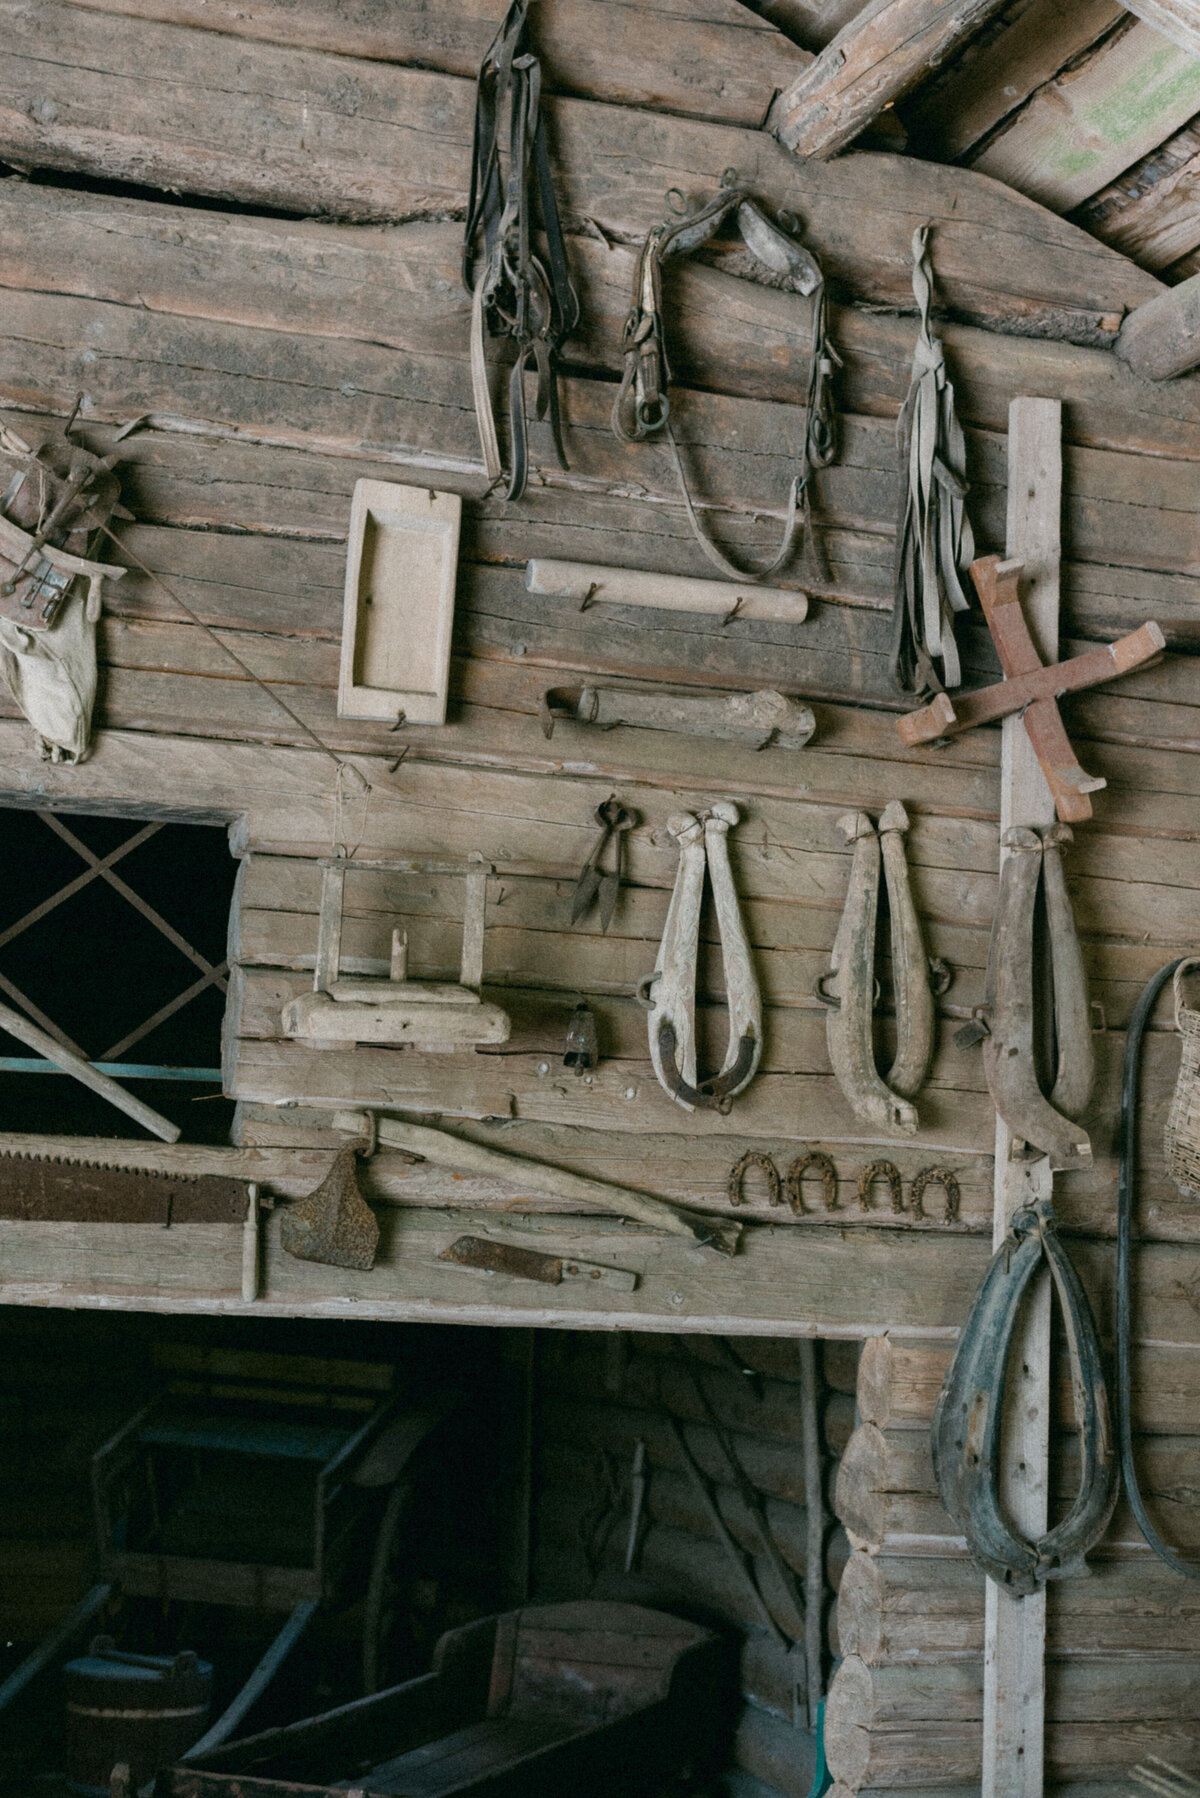 Old horse harnesses hanging on the wall. An image by wedding photographer Hannika Gabrielsson.